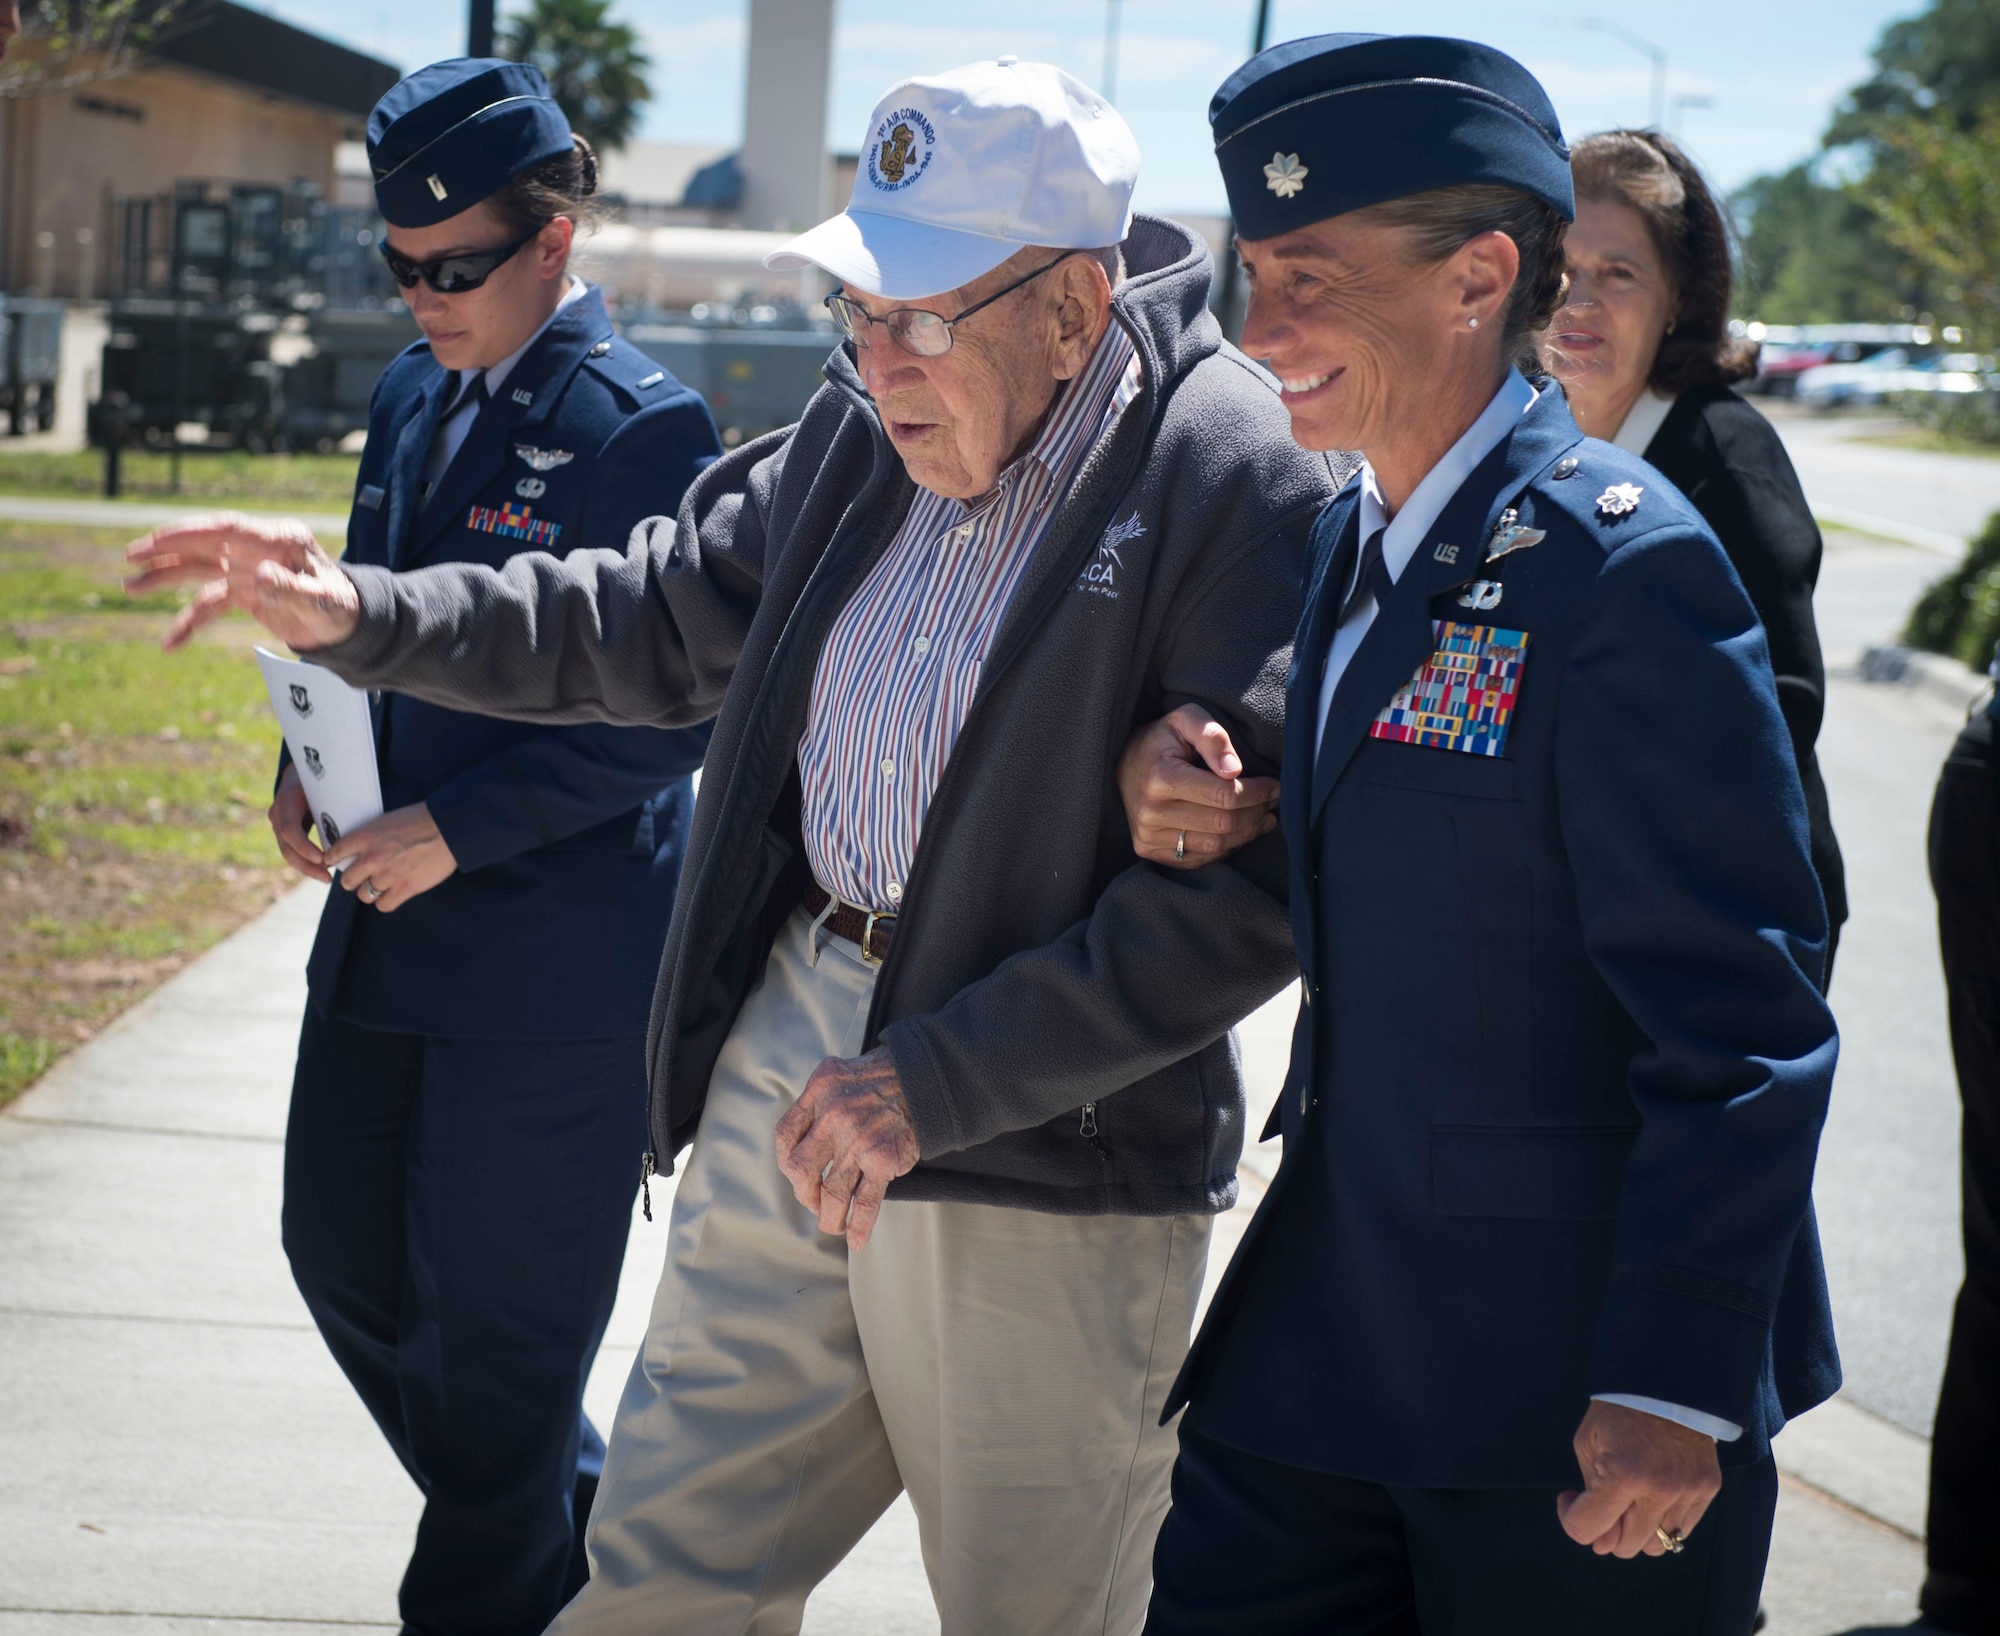 Lt. Col. Allison Black, the commander of the 319th Special Operation Squadron, escorts retired Lt. Col. Richard E. Cole before a building renaming and dedication ceremony at Hurlburt Field, Fla., April 7, 2017. Cole is the last surviving Doolittle Raider whose Air Force roots date back to the origination of the 319th SOS. (U.S. Air Force photo by Senior Airman Krystal M. Garrett)